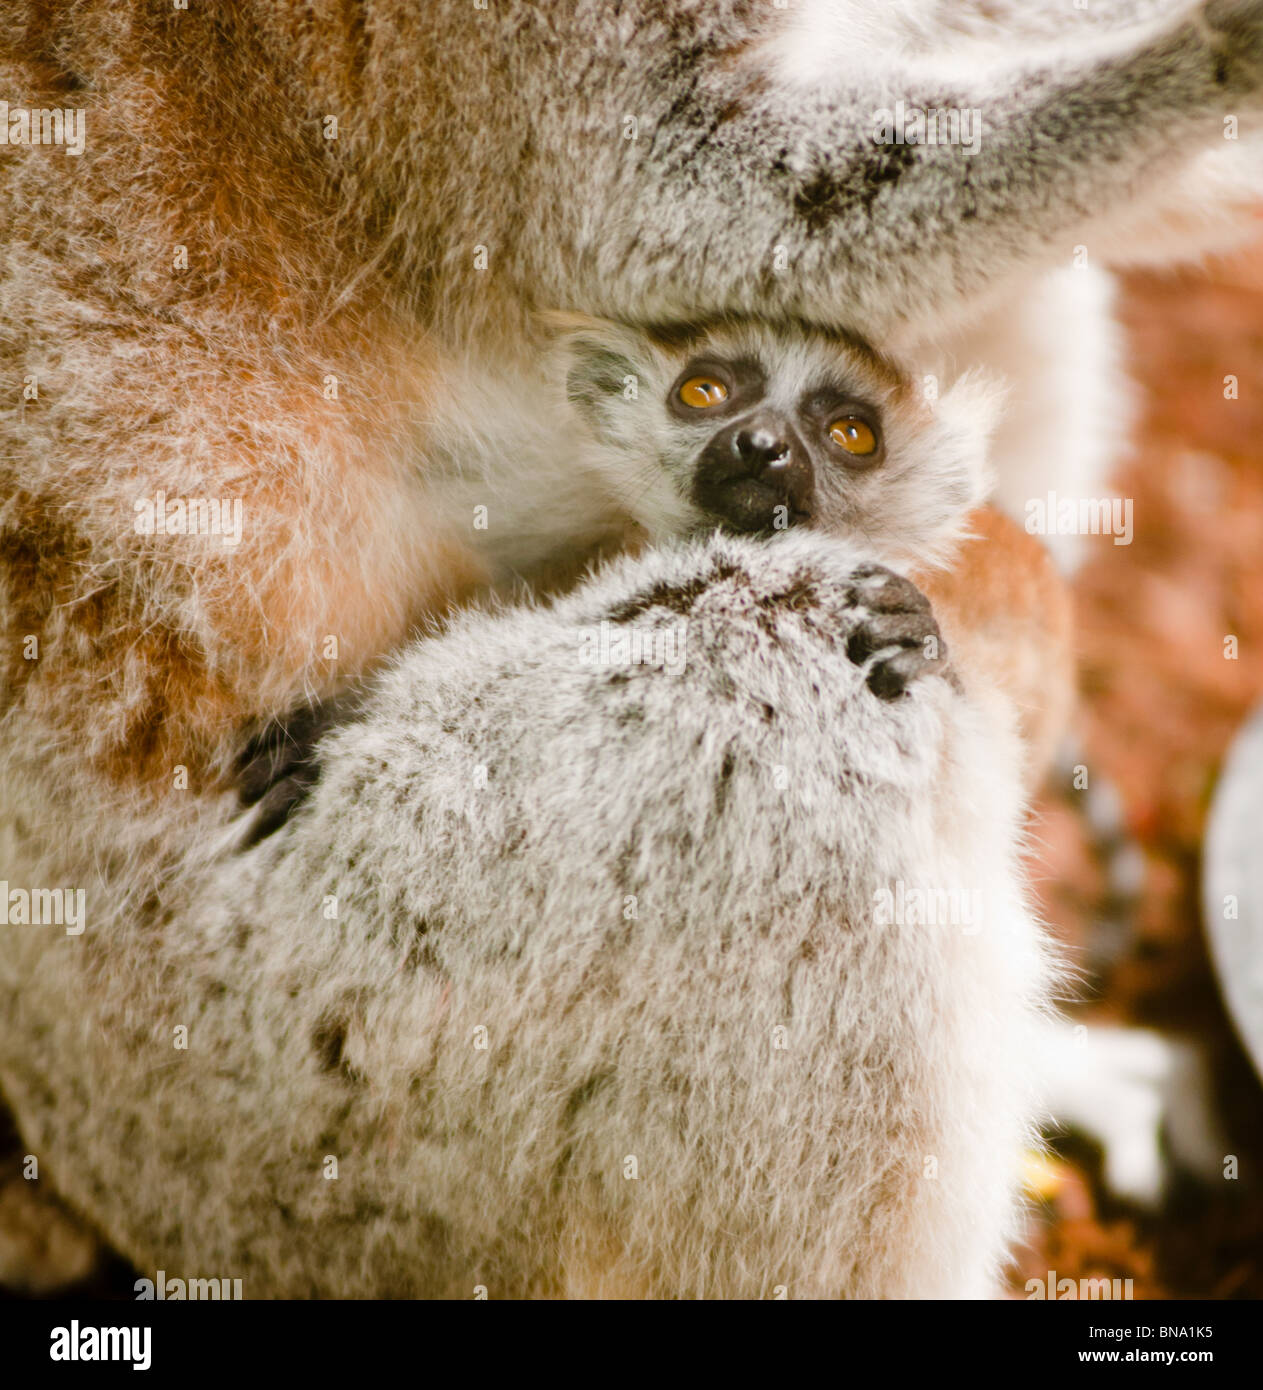 Baby Lemur clings on tight to its mother Stock Photo